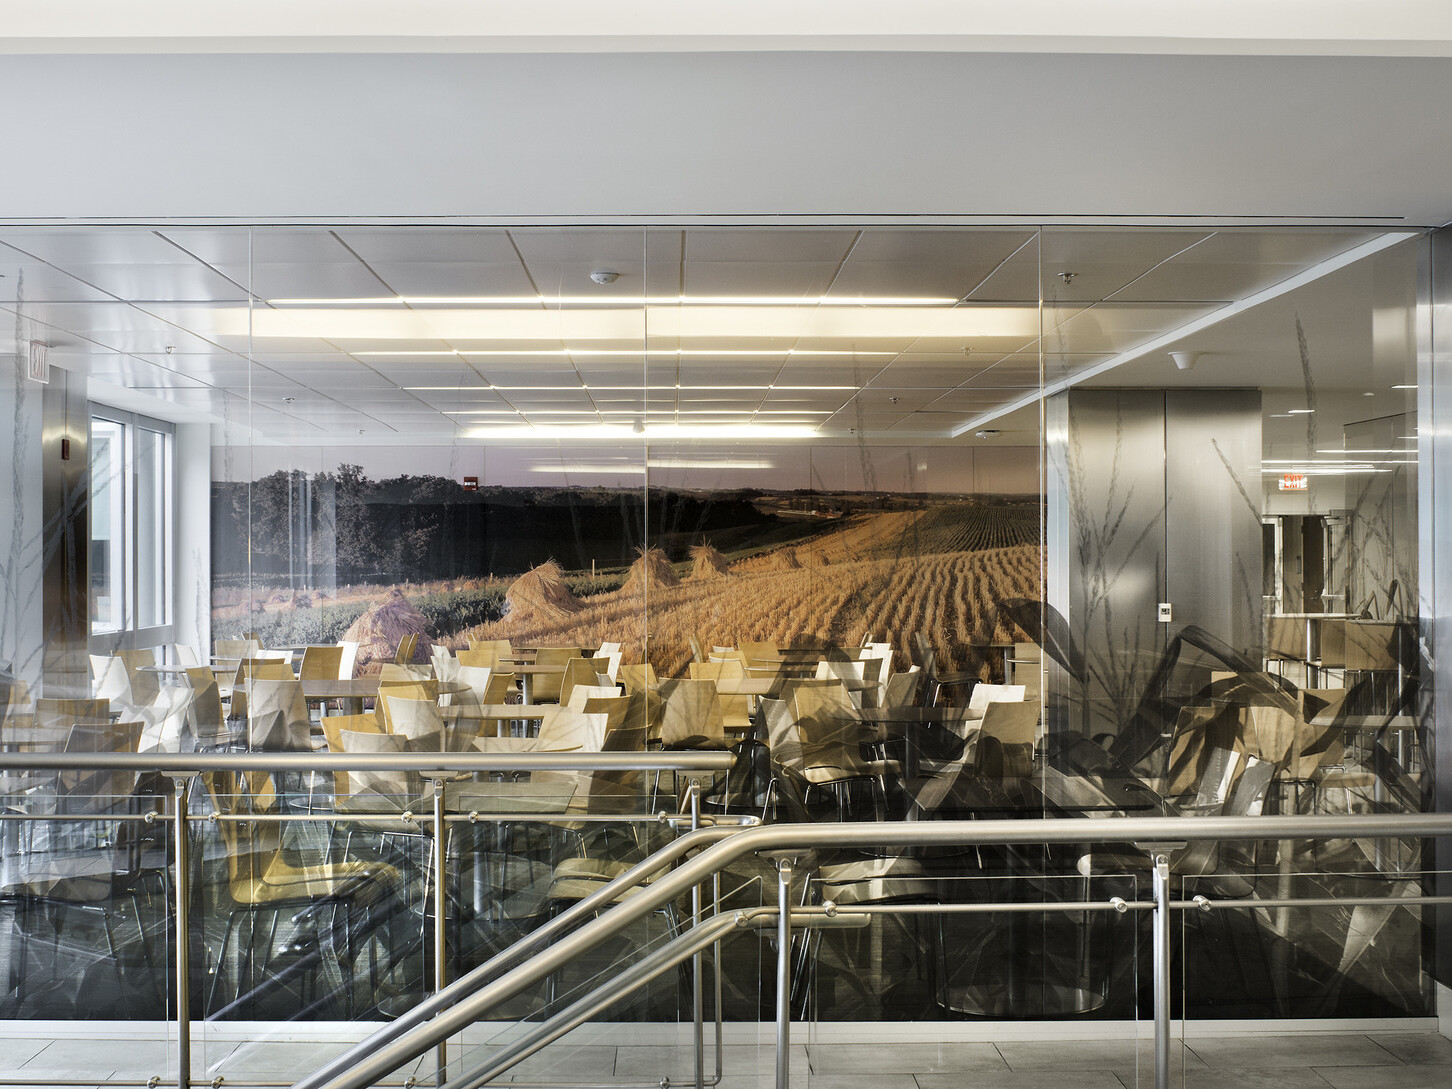 Looking through a glass window at tables and chairs in front of a wall mural